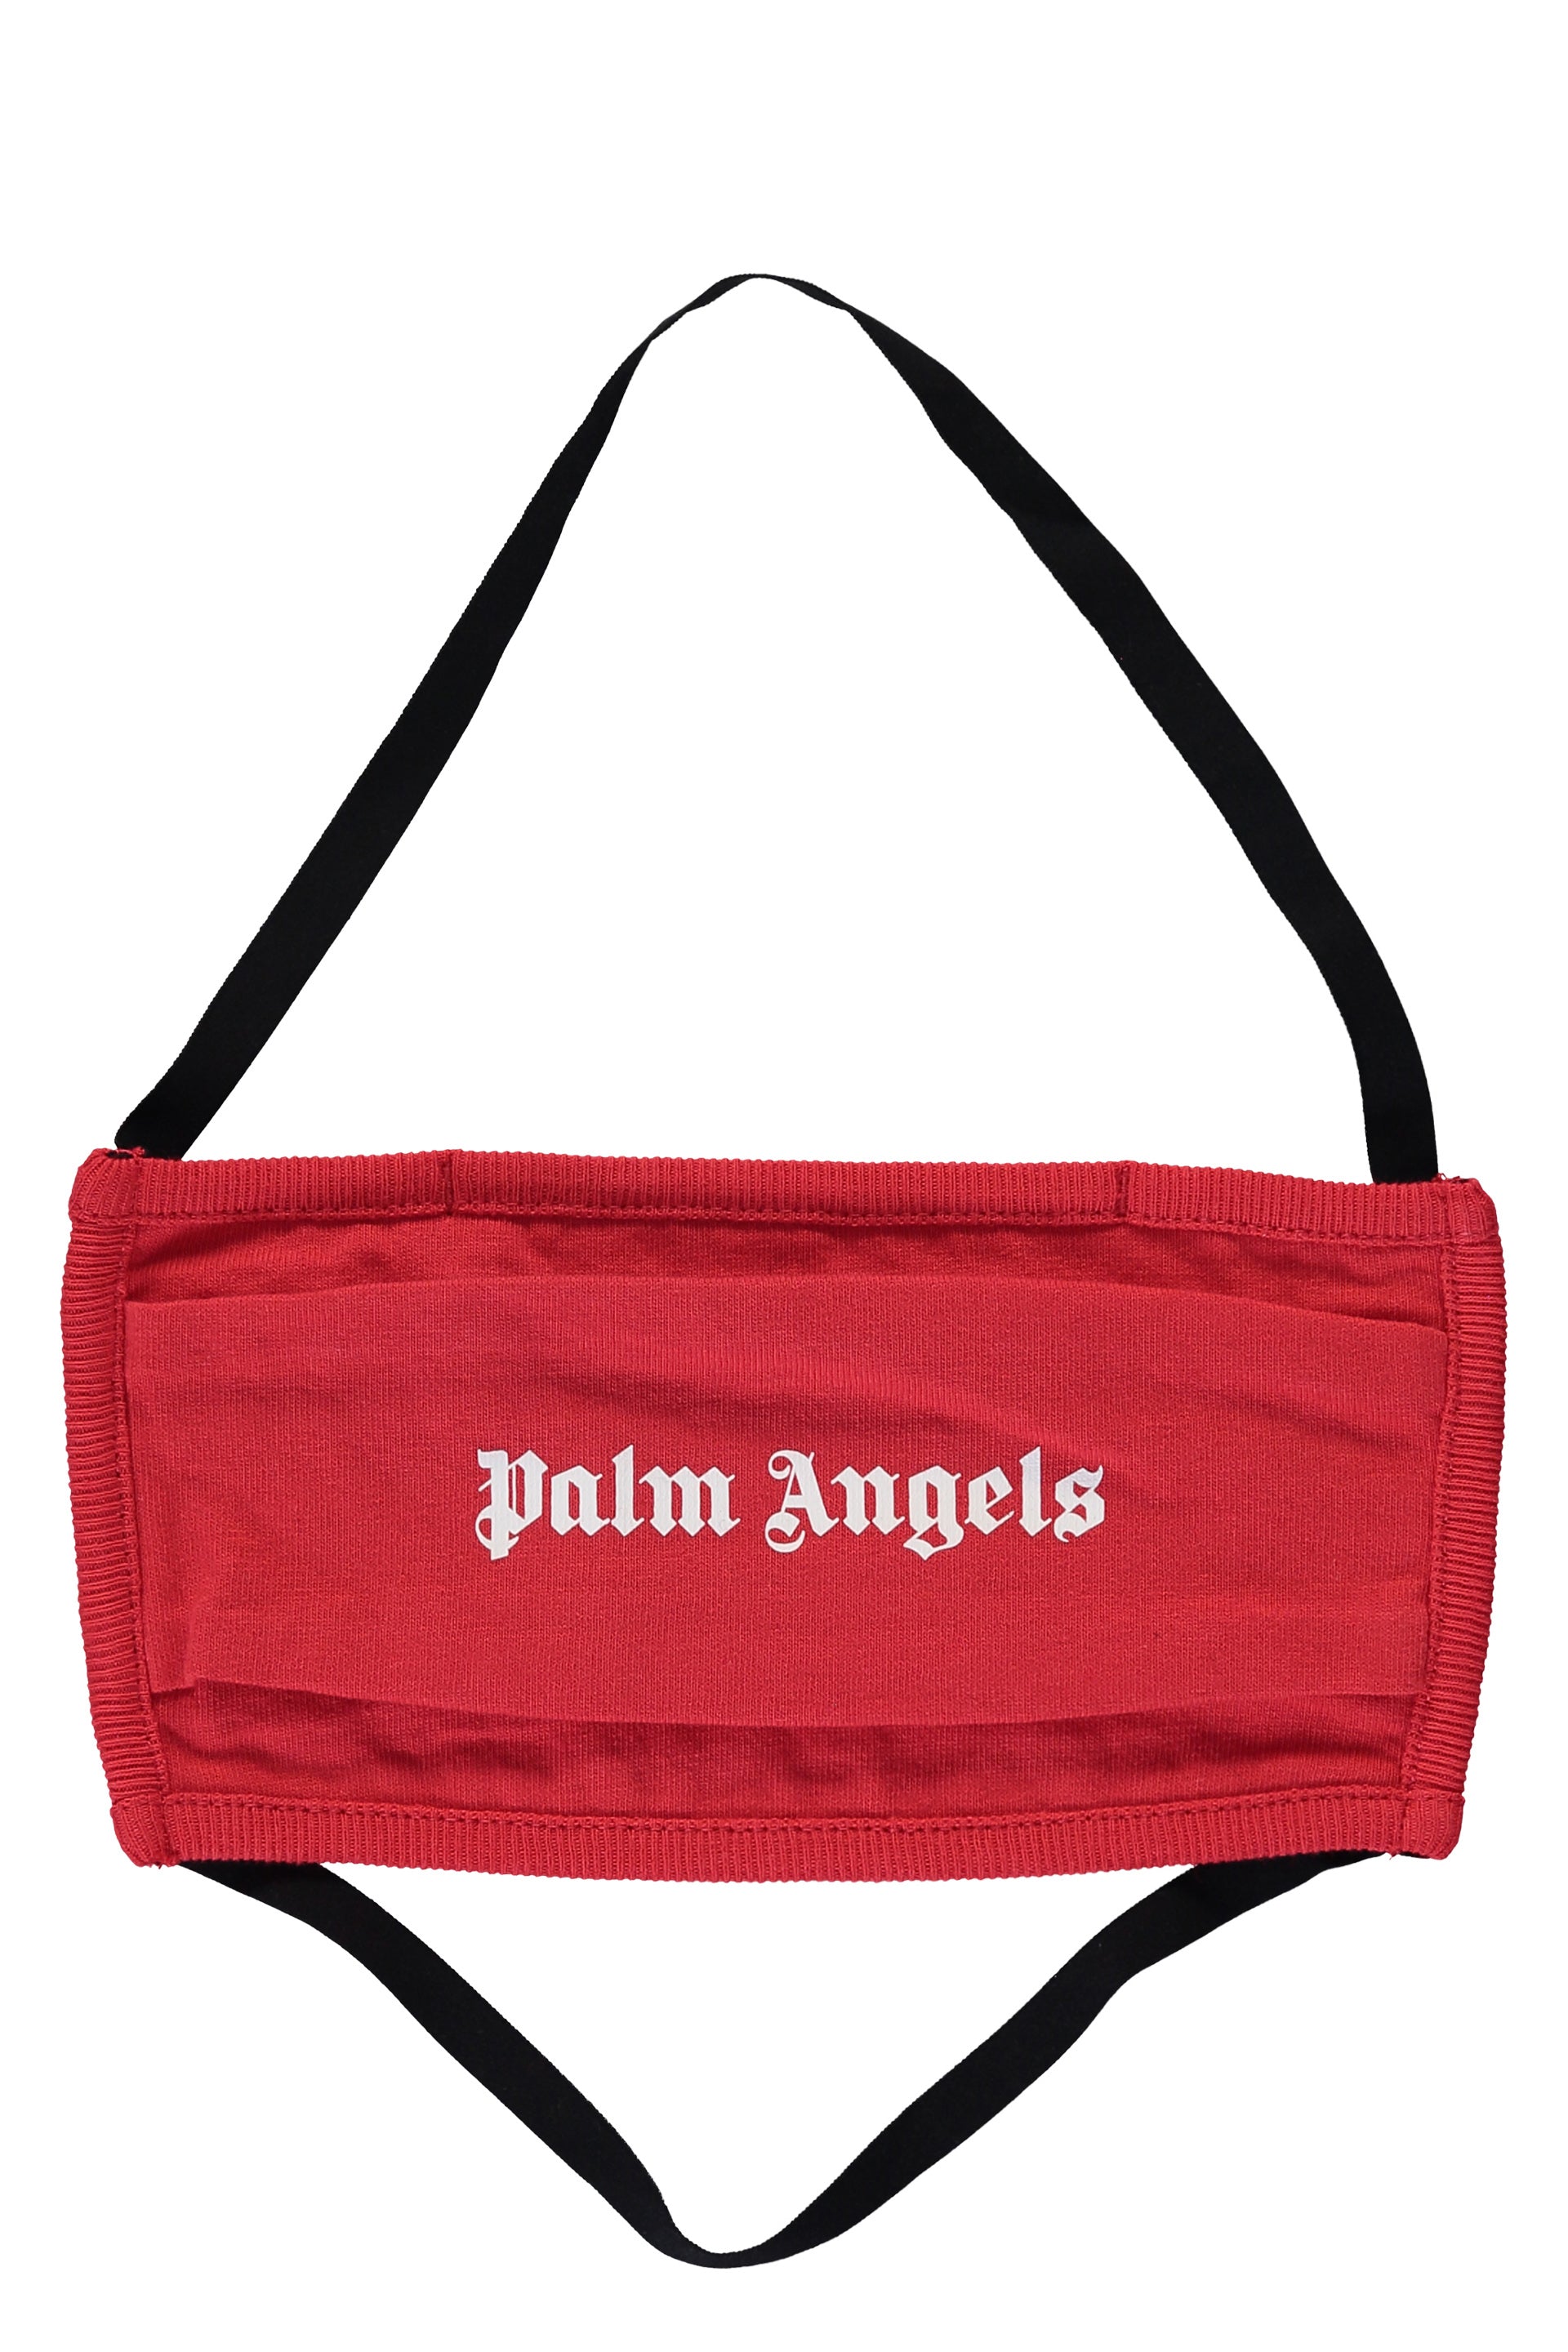 Palm-Angels-OUTLET-SALE-Mask-with-logo-Accessoires-TU-ARCHIVE-COLLECTION.jpg